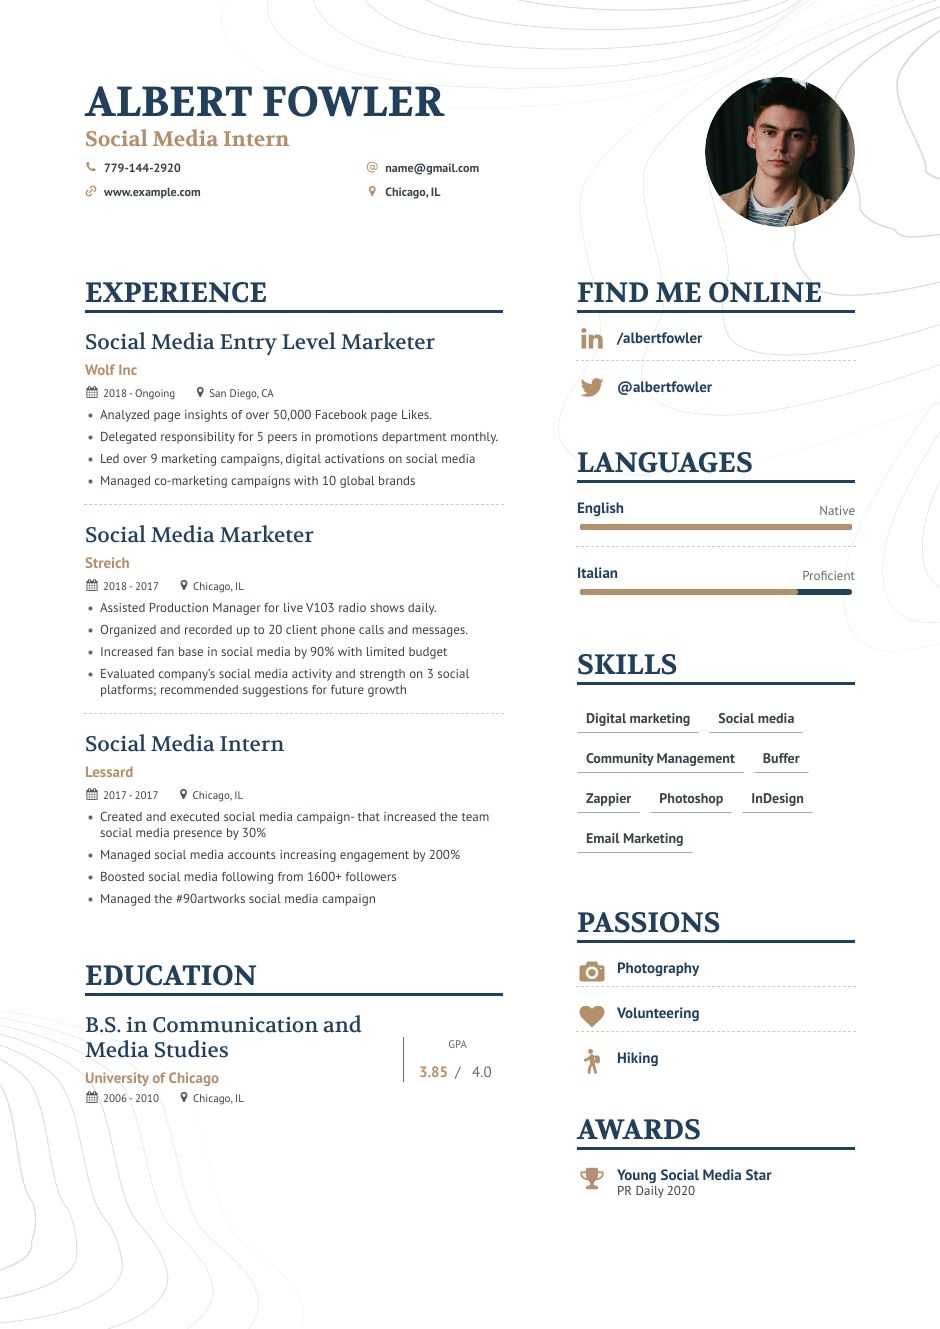 Social Media Manager Resume Examples Guide For 2021